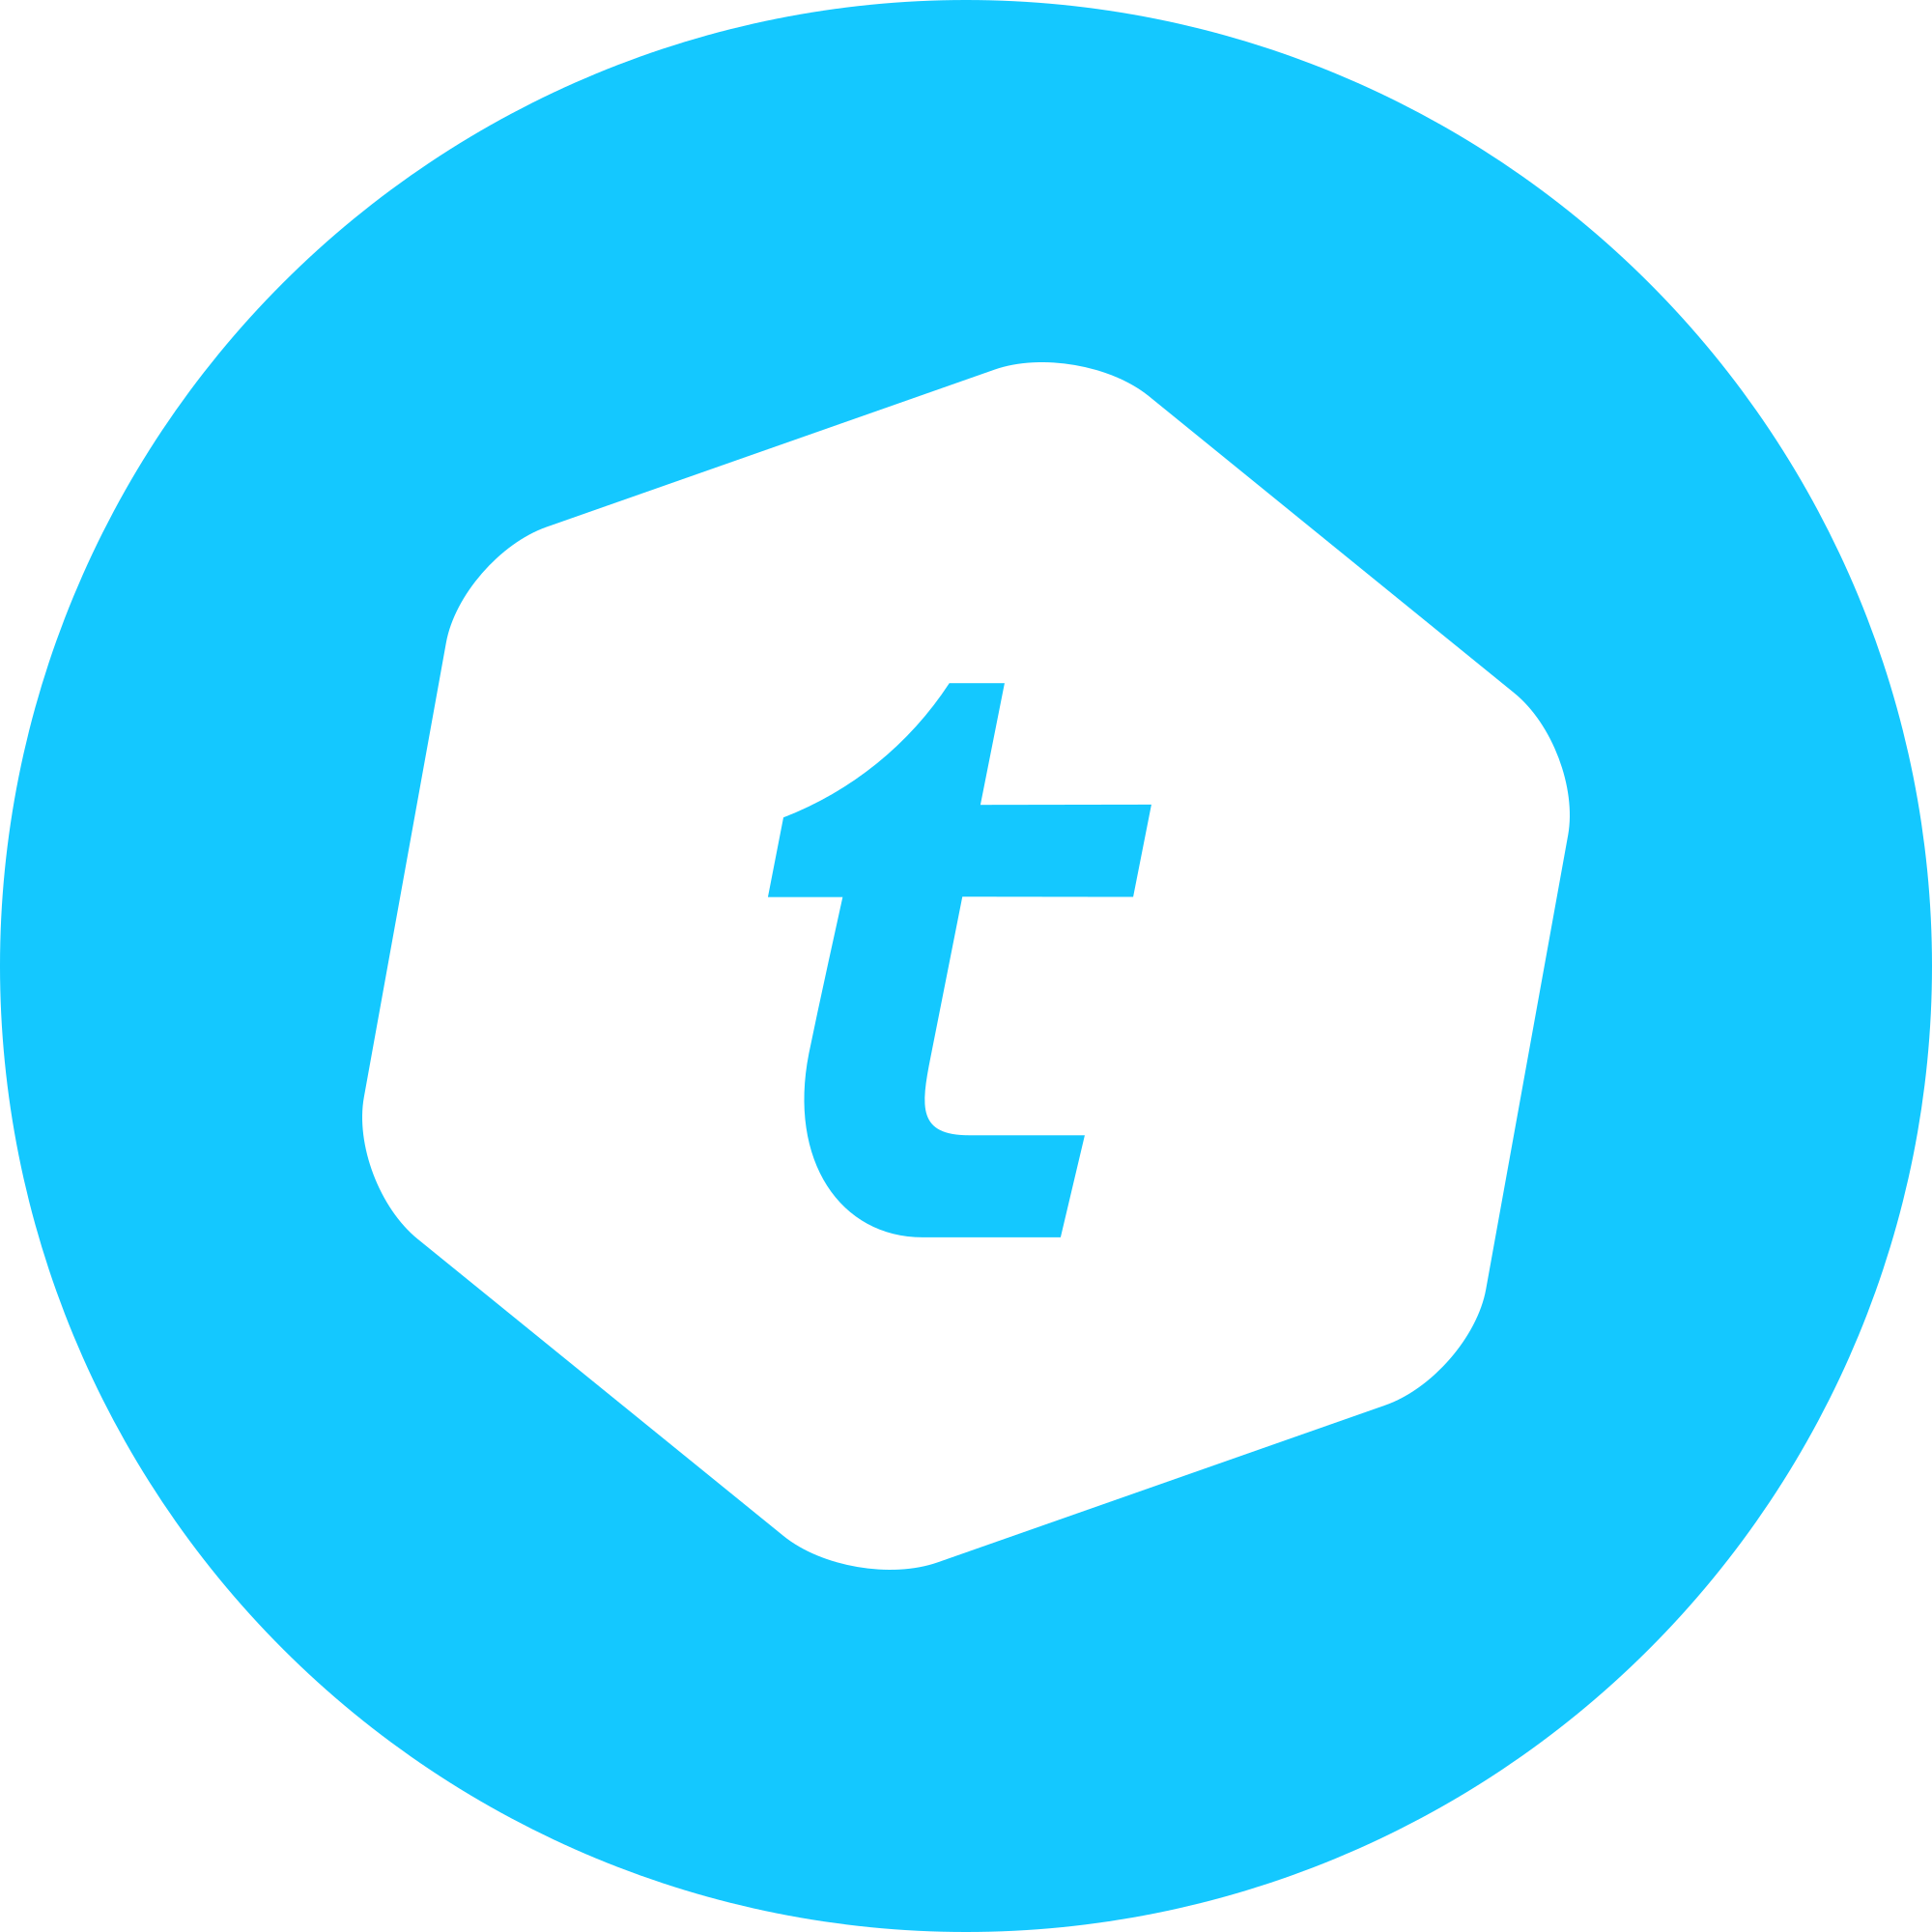 Telcoin (TEL) Logo .SVG and  how to buy telcoin on crypto.com